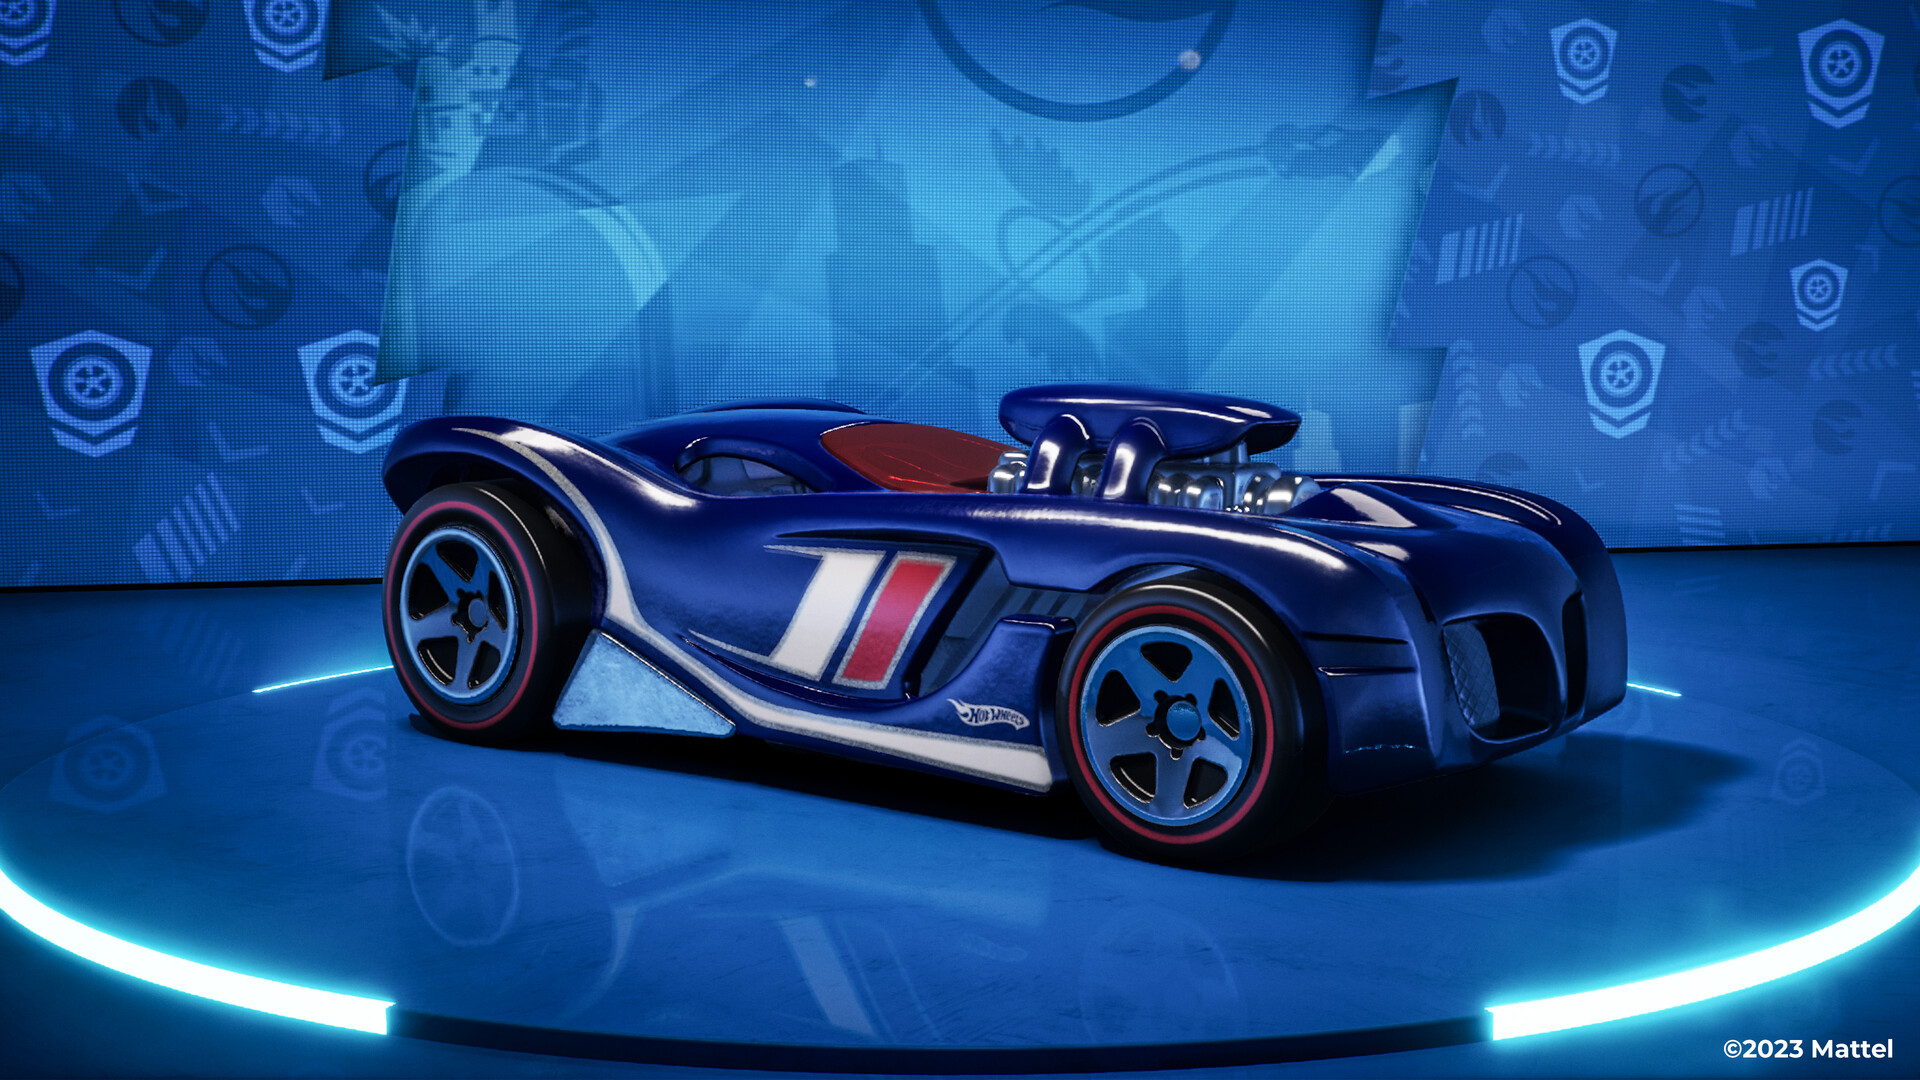 Hot Wheels Unleashed 2 Turbocharged PlayStation 4 Account Pixelpuffin.net Activation Link